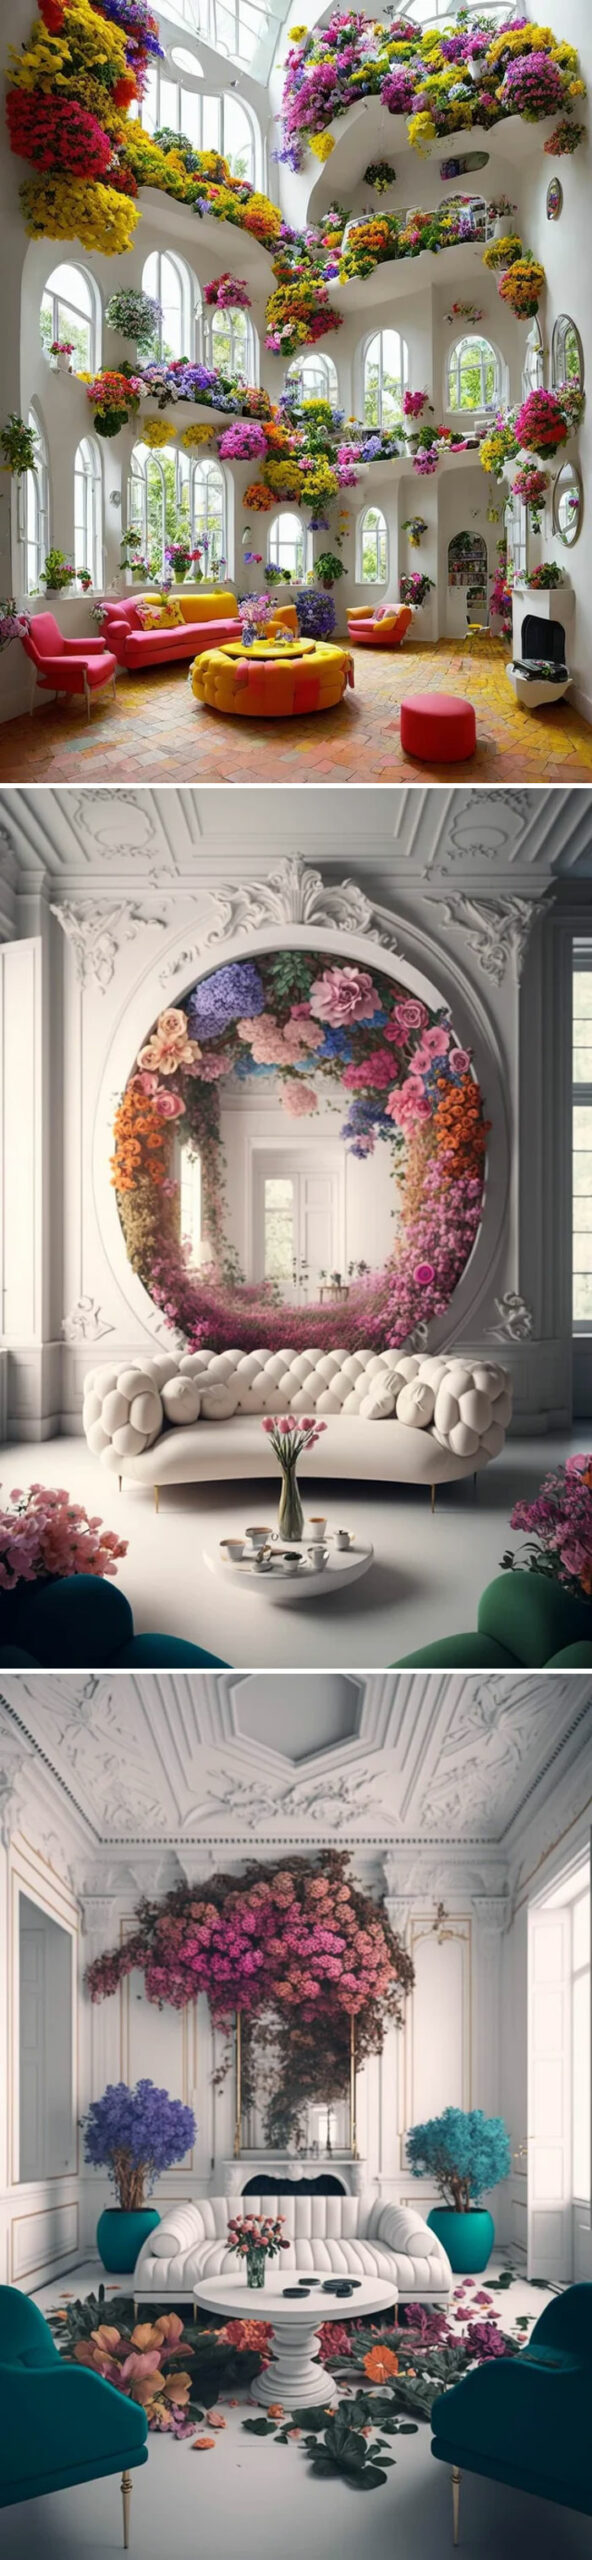 Floral Interiors By Hassan Ragab